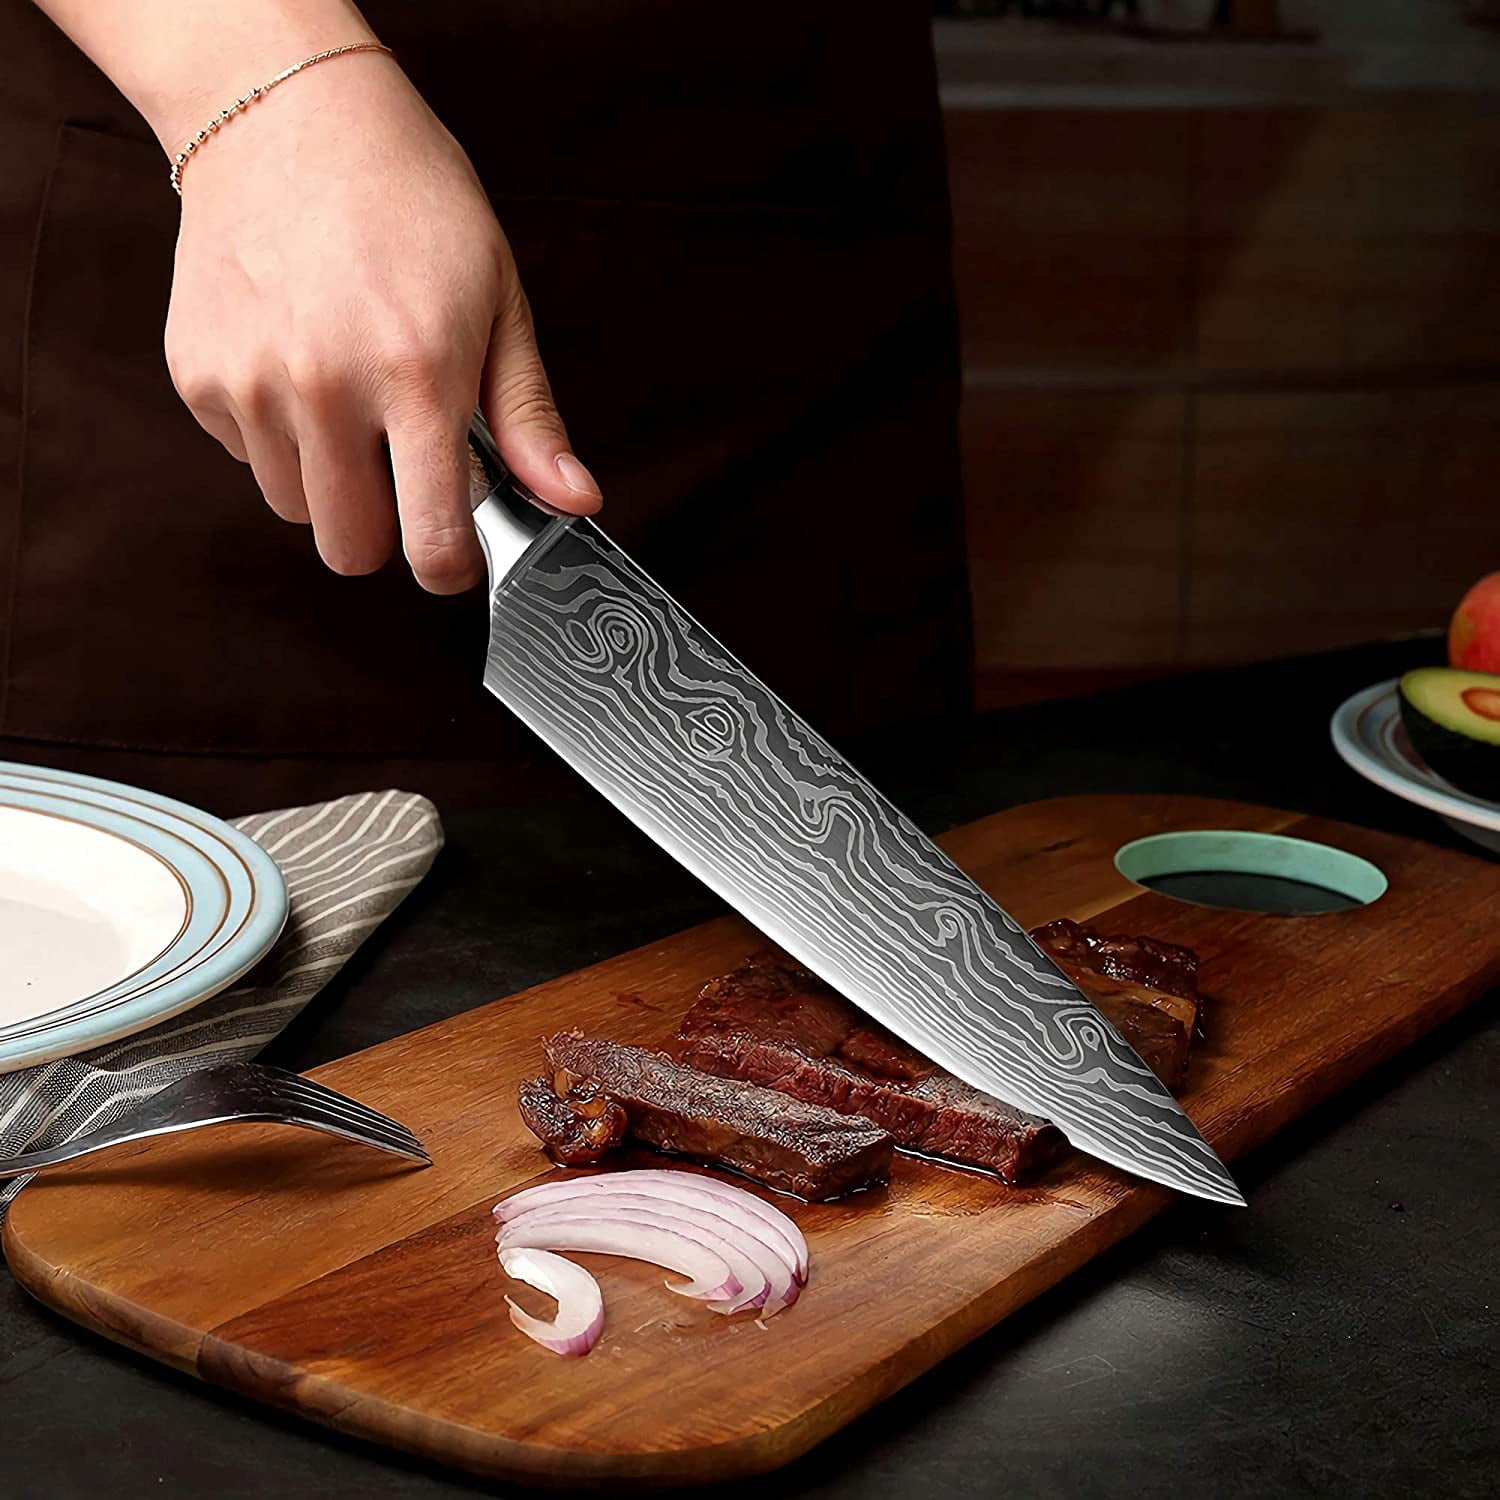 MAIRICO Ultra Sharp Premium 8-Inch Stainless Steel Chef Knife - All-Purpose Kitchen Knife for Slicing, Cutting, Mincing, Chopping Vegetables, Meat